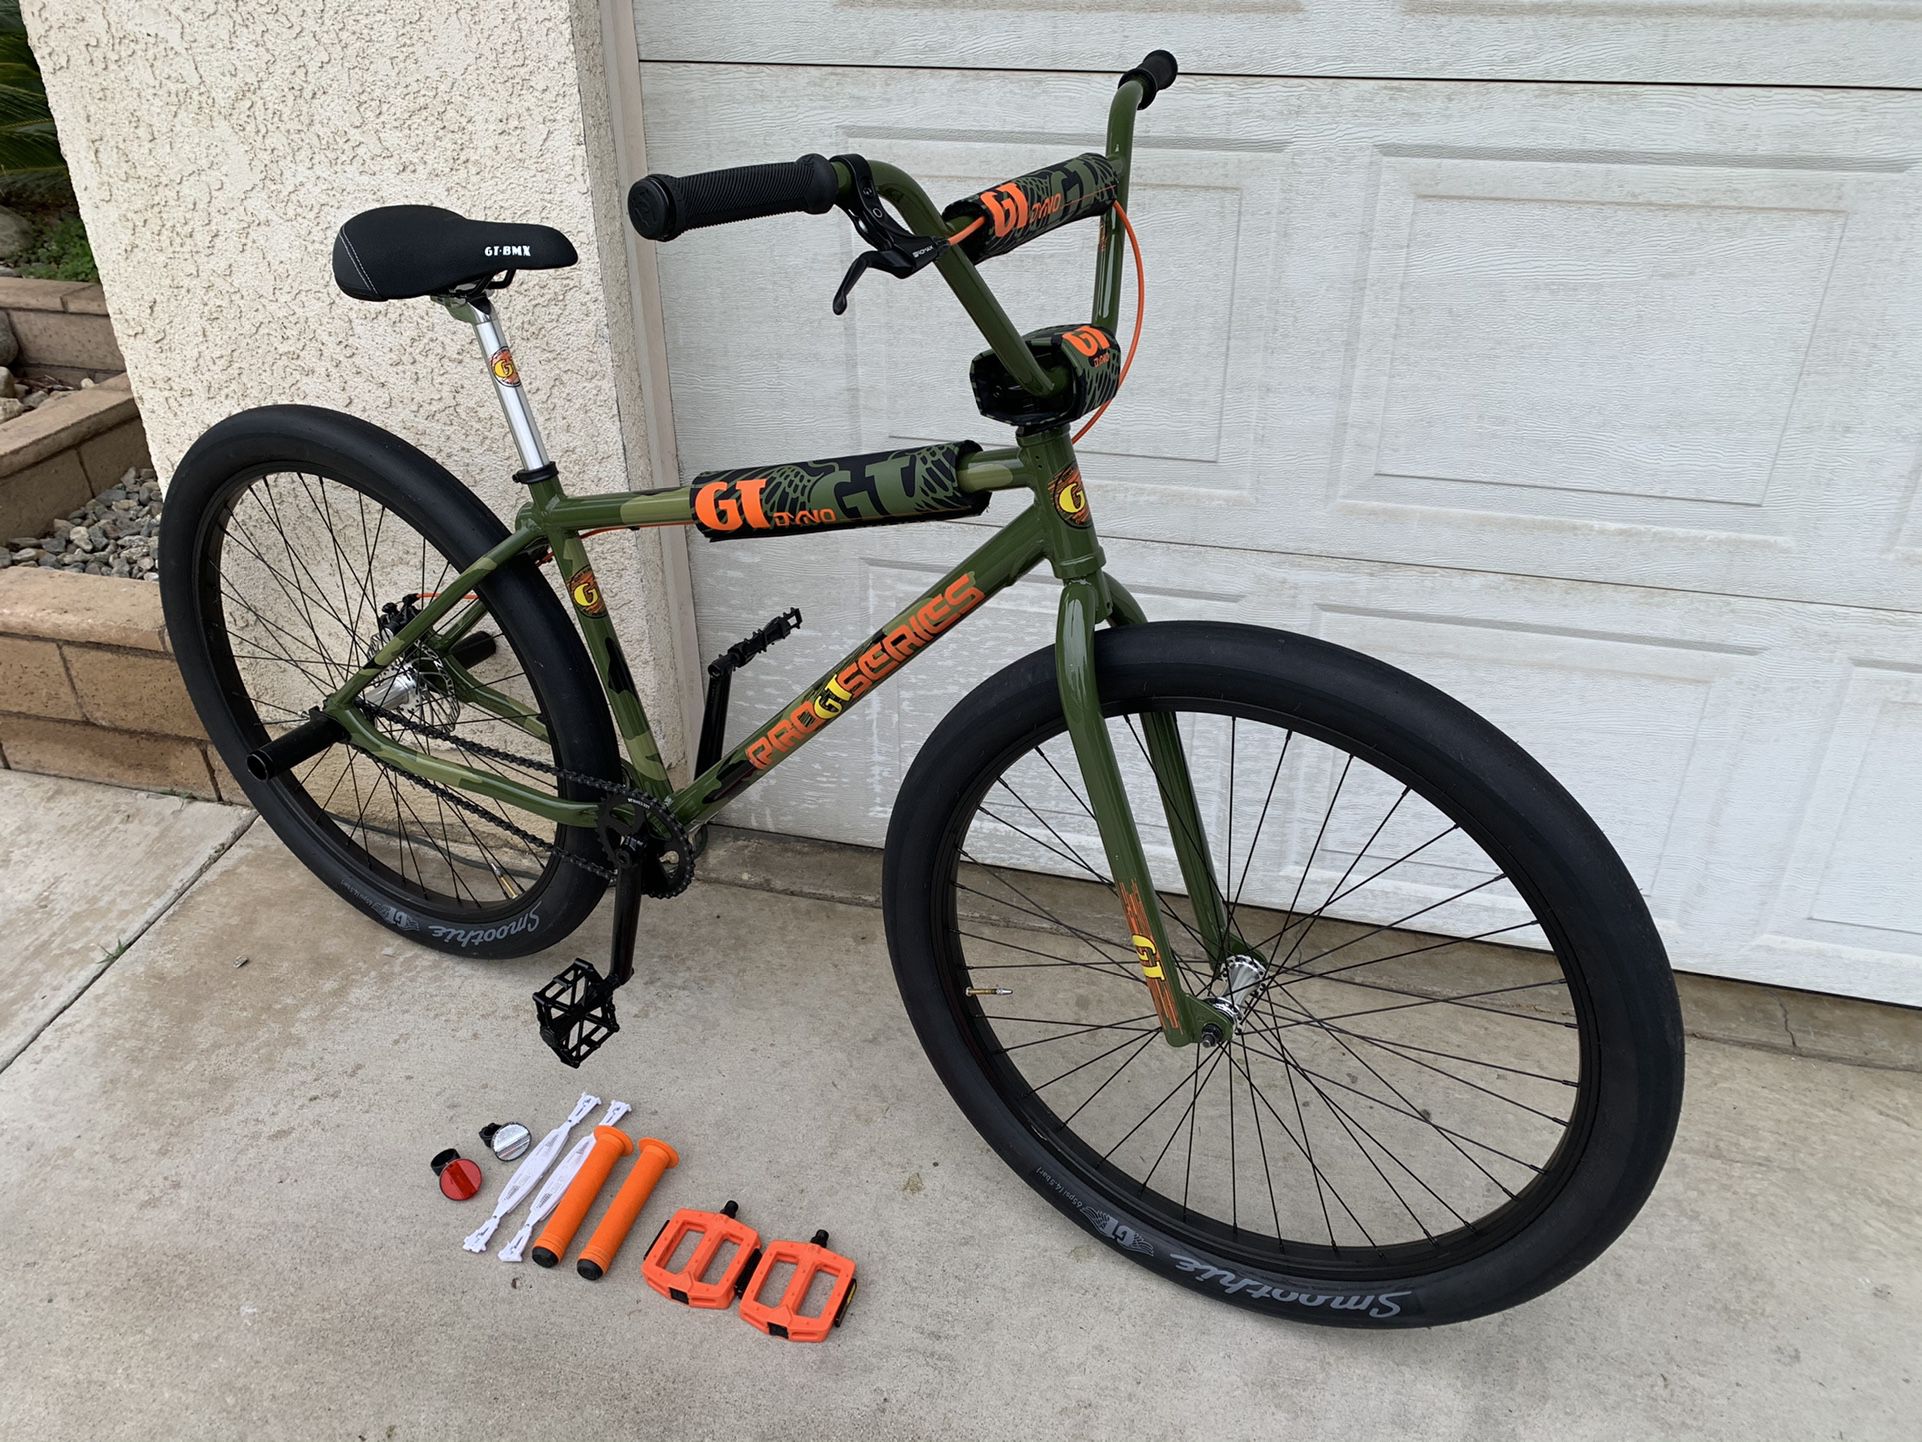 21 Gt Pro Series 29 Heritage Bmx Bike Limited Edition Discontinued Brand New For Sale In Ontario Ca Offerup